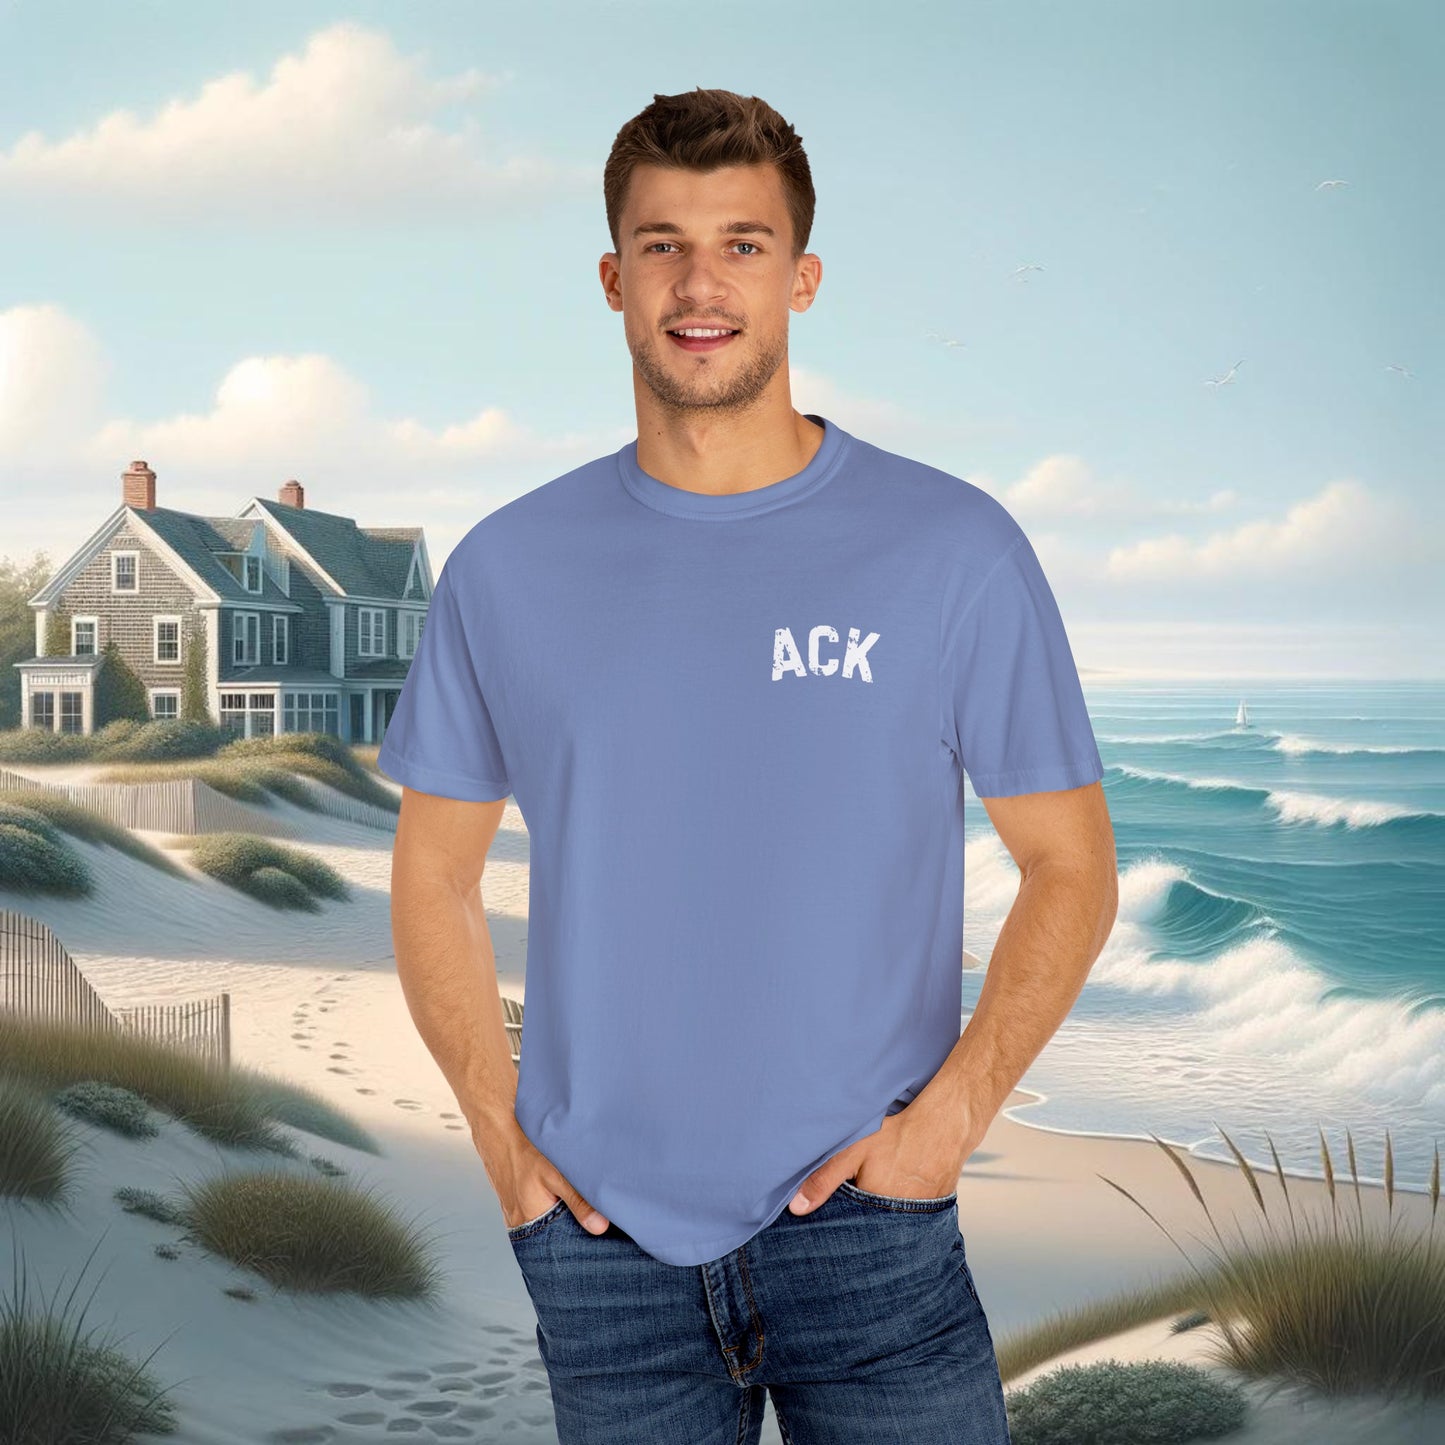 Nantucket Summer Vibes T-Shirt - Comfort Colors 1717, 100% Ring-Spun Cotton, Relaxed Fit